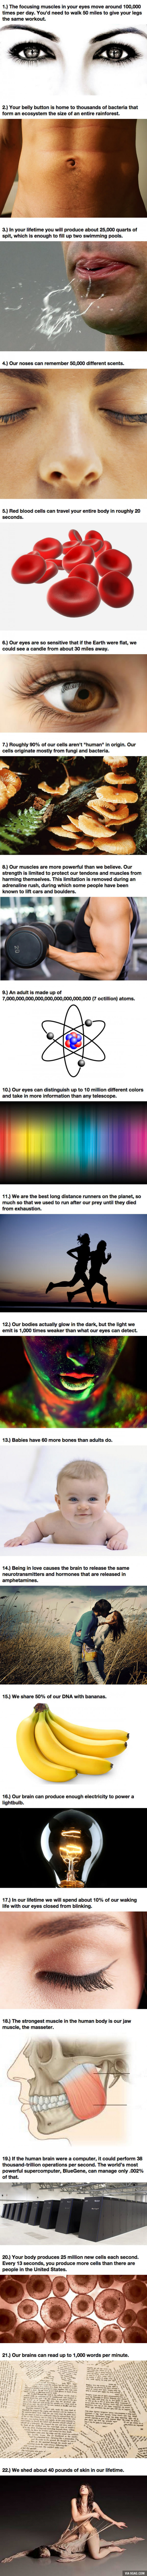 You Never Learned These 22 Facts About The Human Body In School